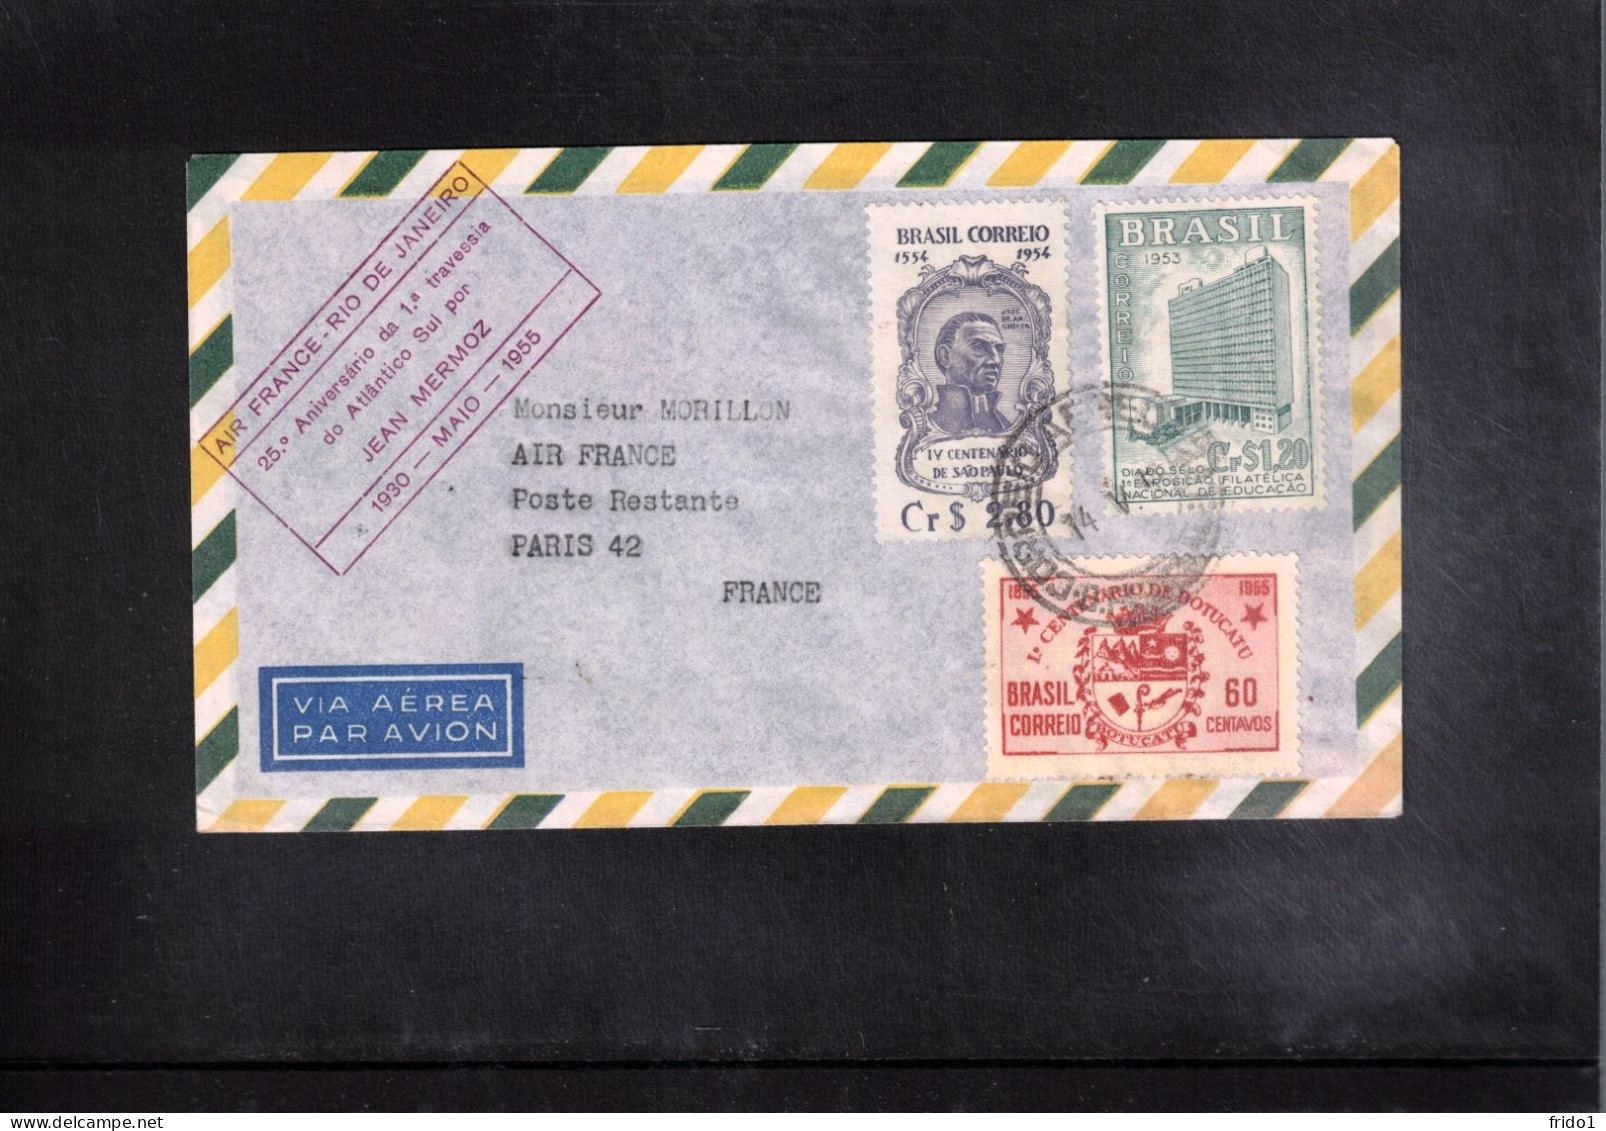 Brazil 1955 25th Anniversary Of The First Crossing Of Atlantic Rio De Janeiro - Paris By Air France Jean Mermoz - Lettres & Documents